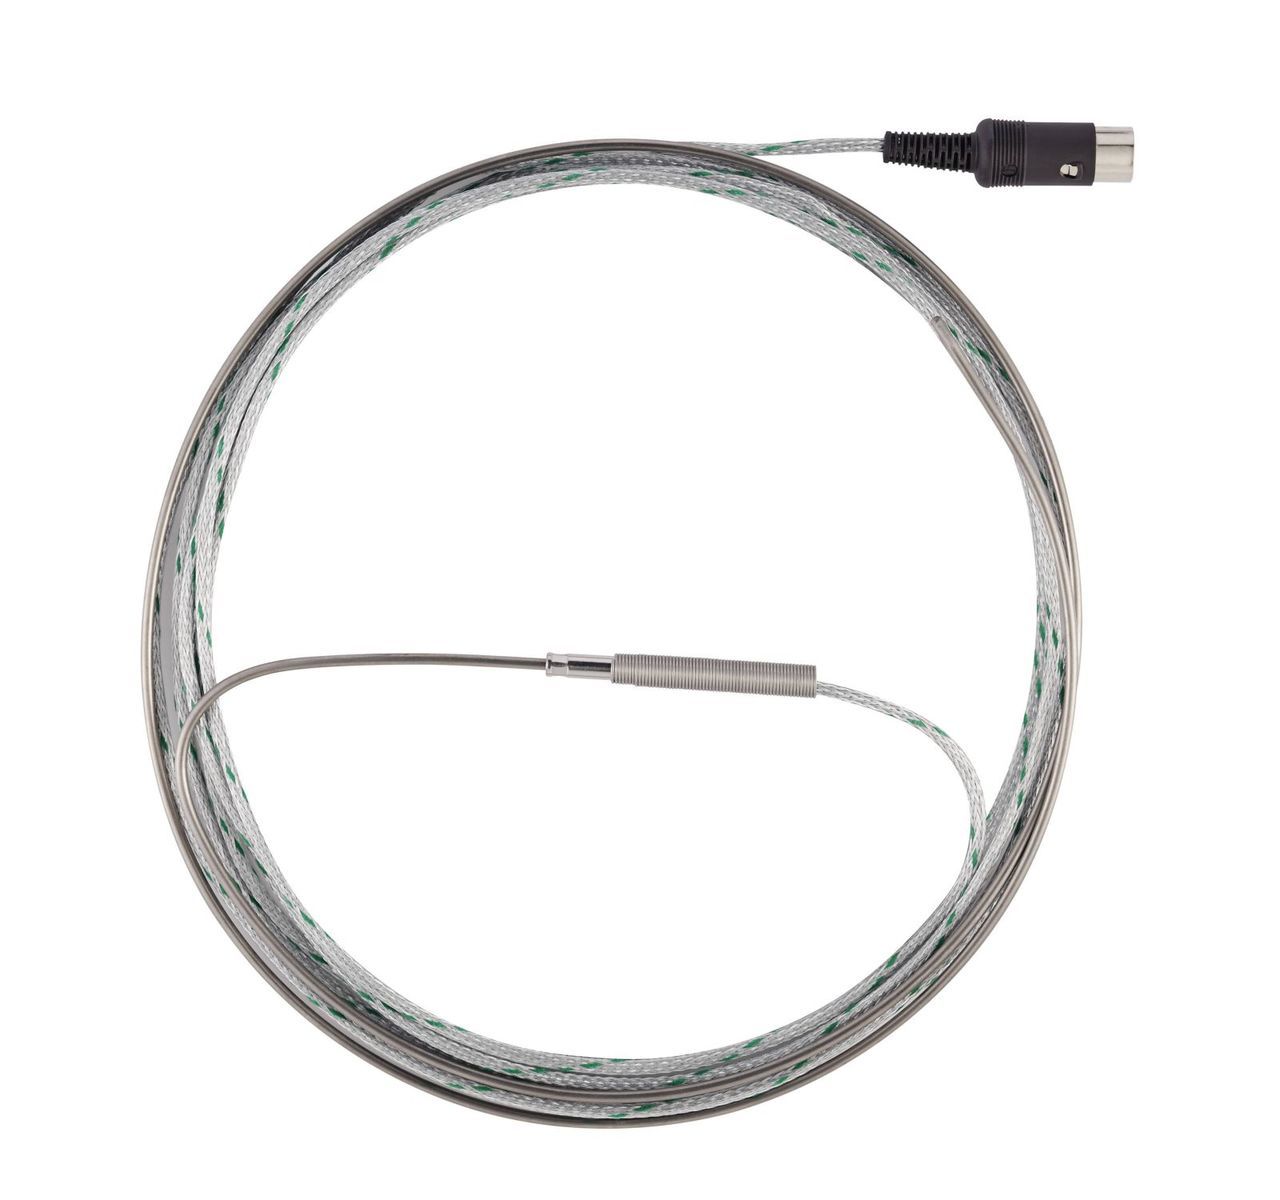 products-0430-0066_thermocouple_13_7.2__47491.1529425962.1280.1280.jpg